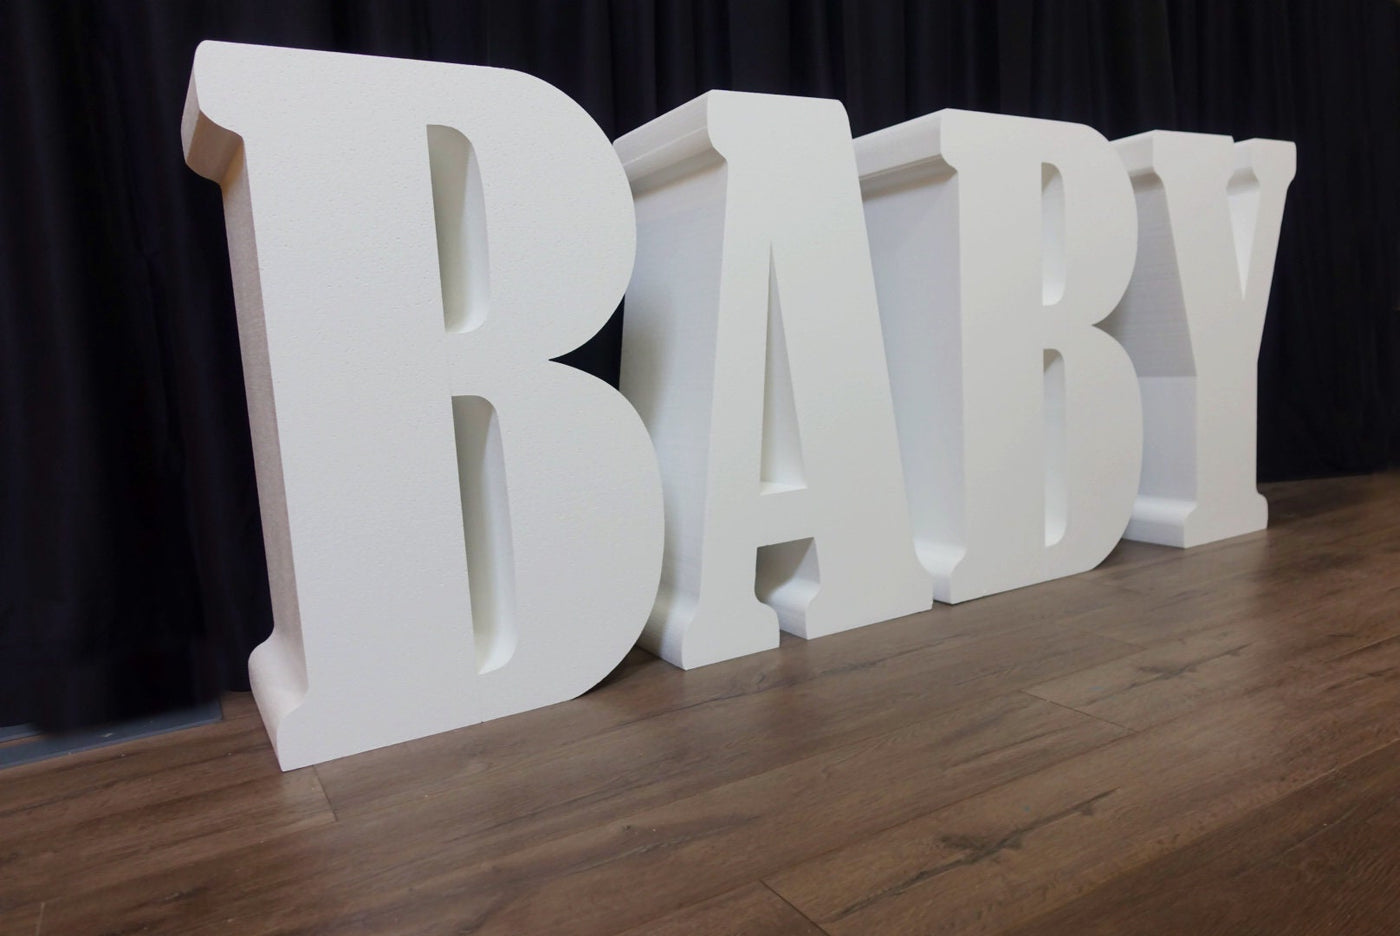 30" tall Large BABY Table Base Foam Letters | Price for 4 letters | Babyshower Decor | Party Decorations